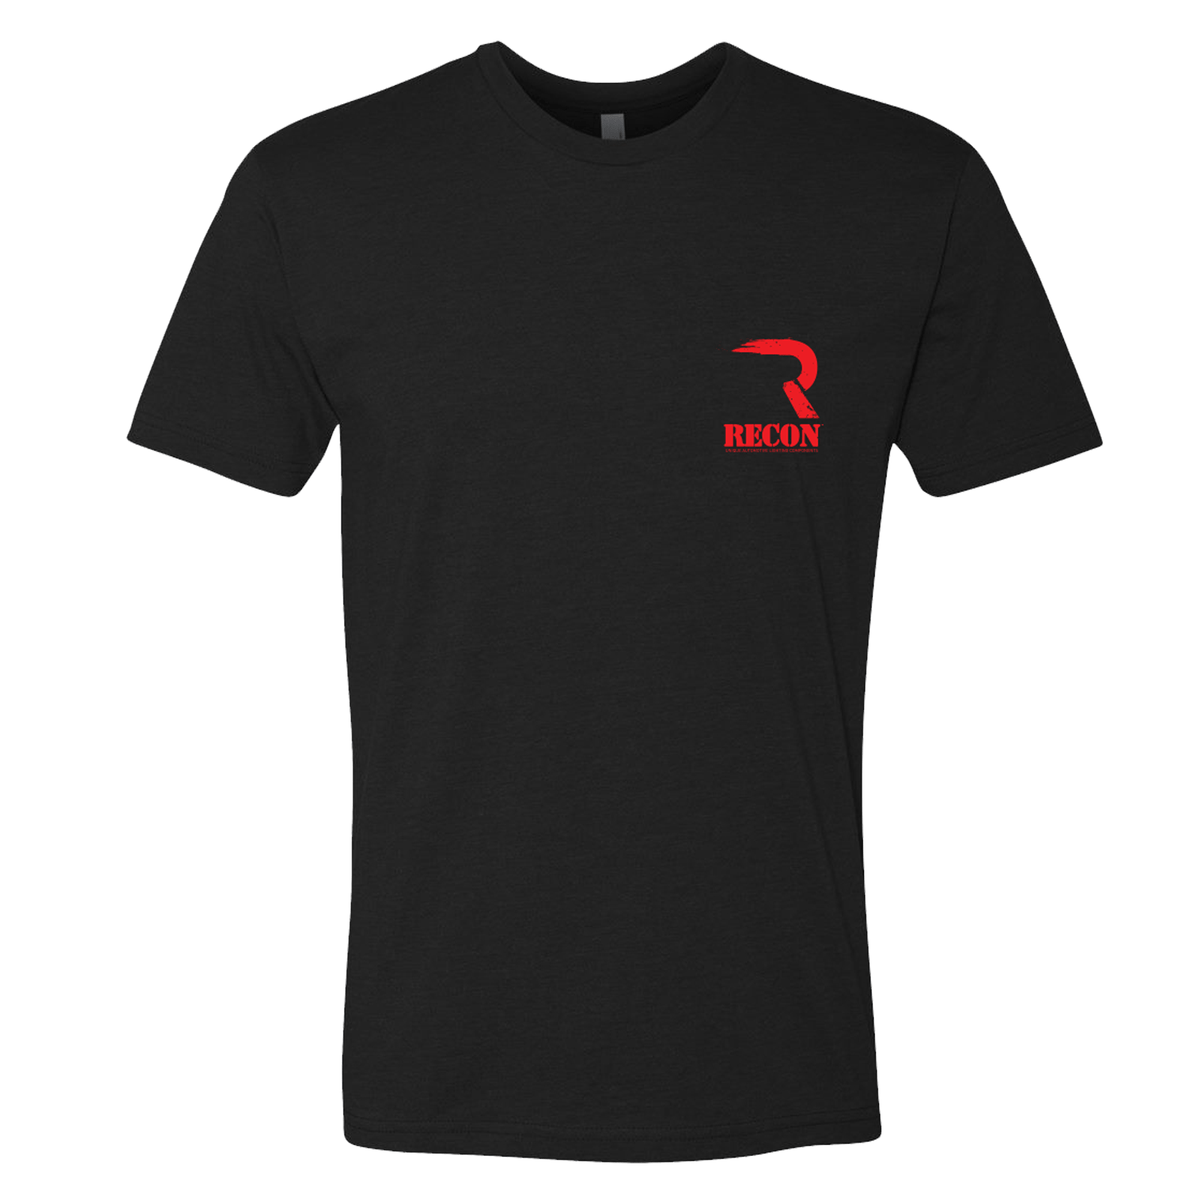 Black RECON t-shirt with red logo (front)